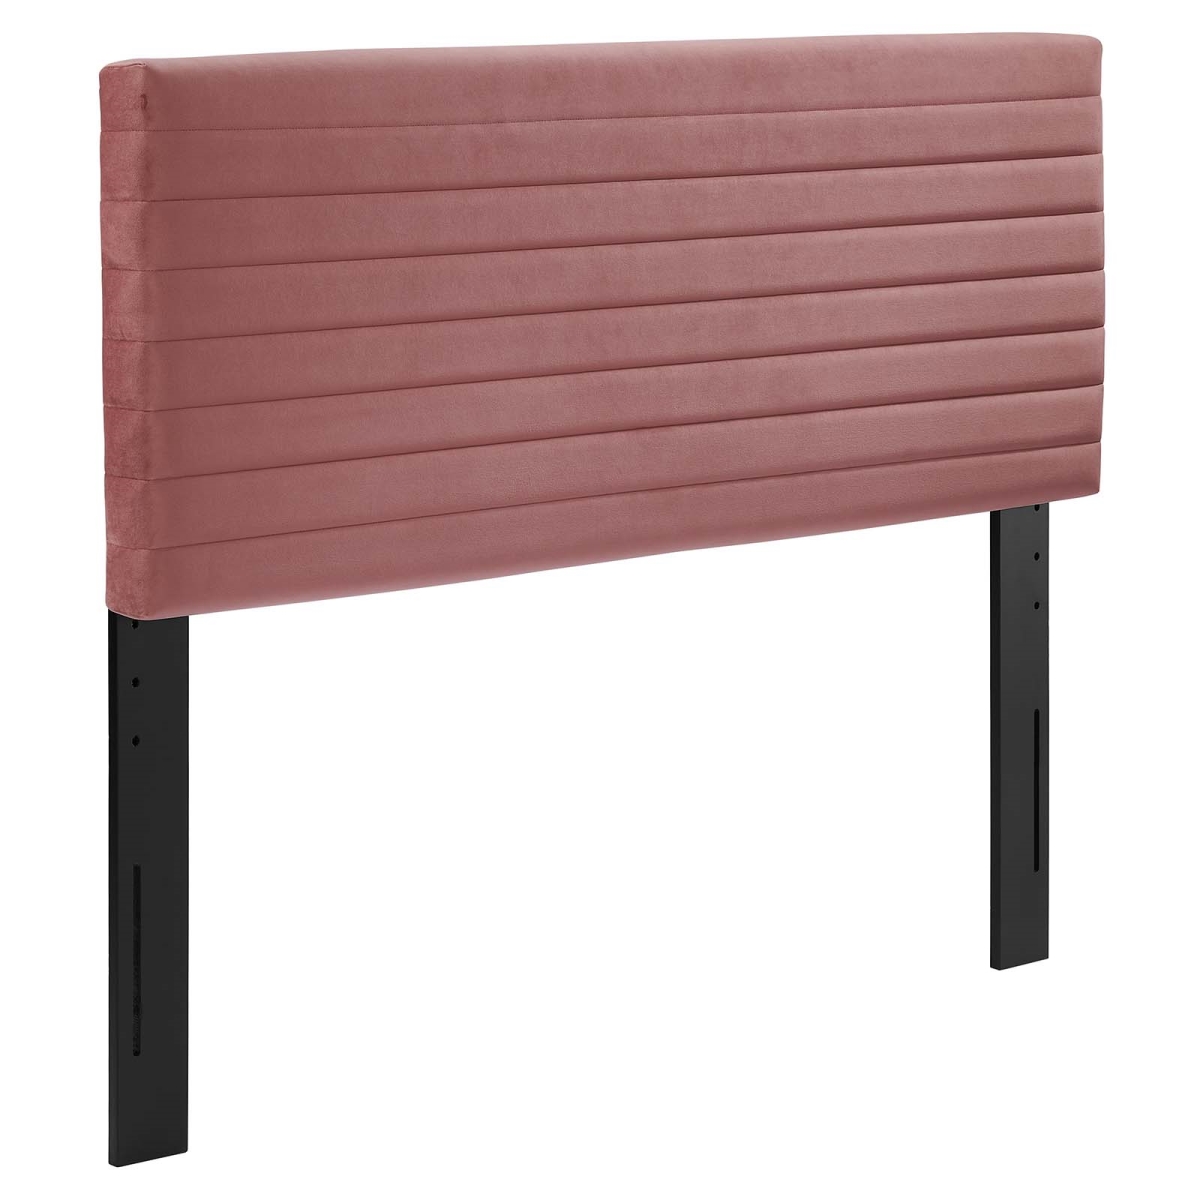 Picture of Modway Furniture MOD-7023-DUS 23 x 39.5 x 3.5 in. Tranquil Twin Size Headboard, Dusty Rose